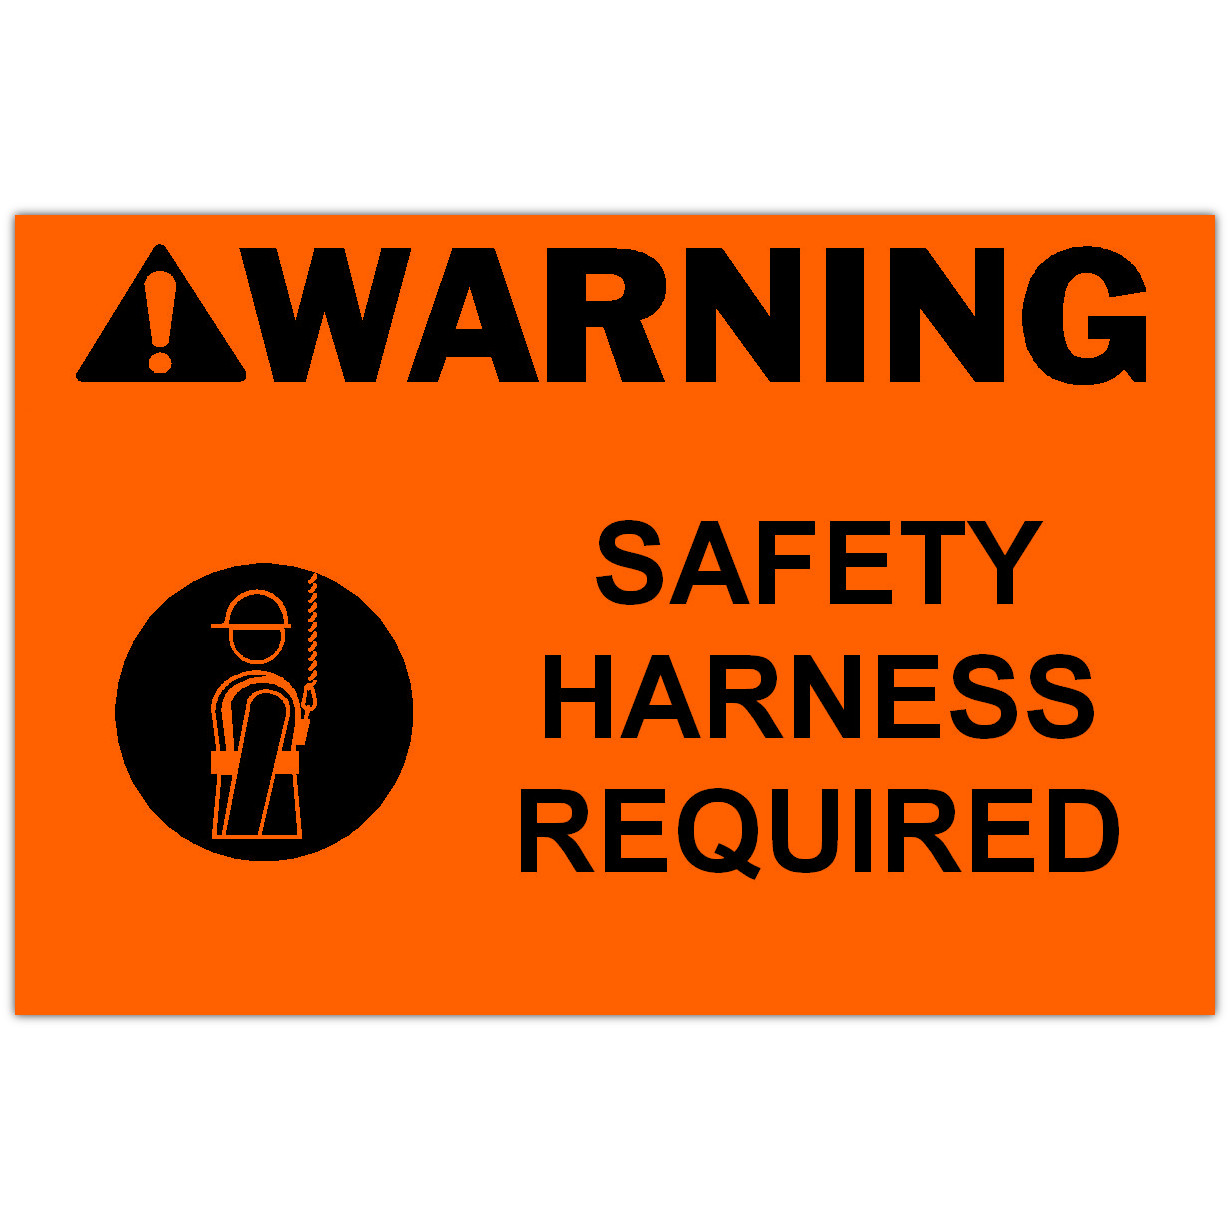 Detail view for 4" x 6" WARNING Safety Harness Required Label